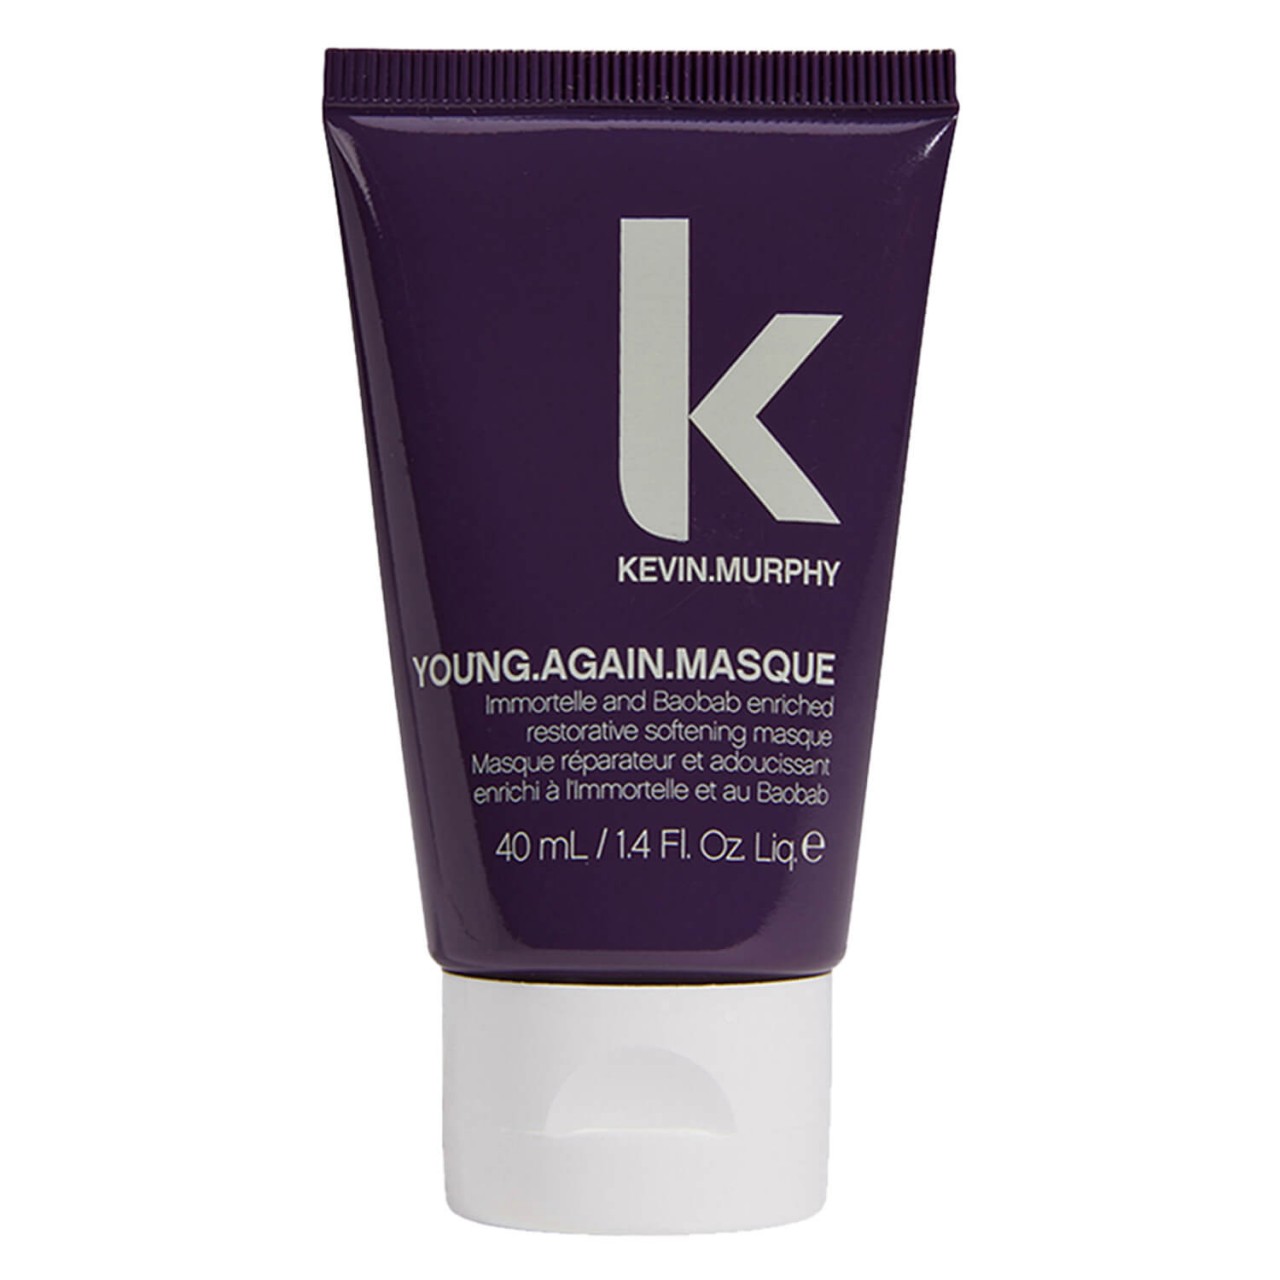 Young.Again - Masque von Kevin Murphy